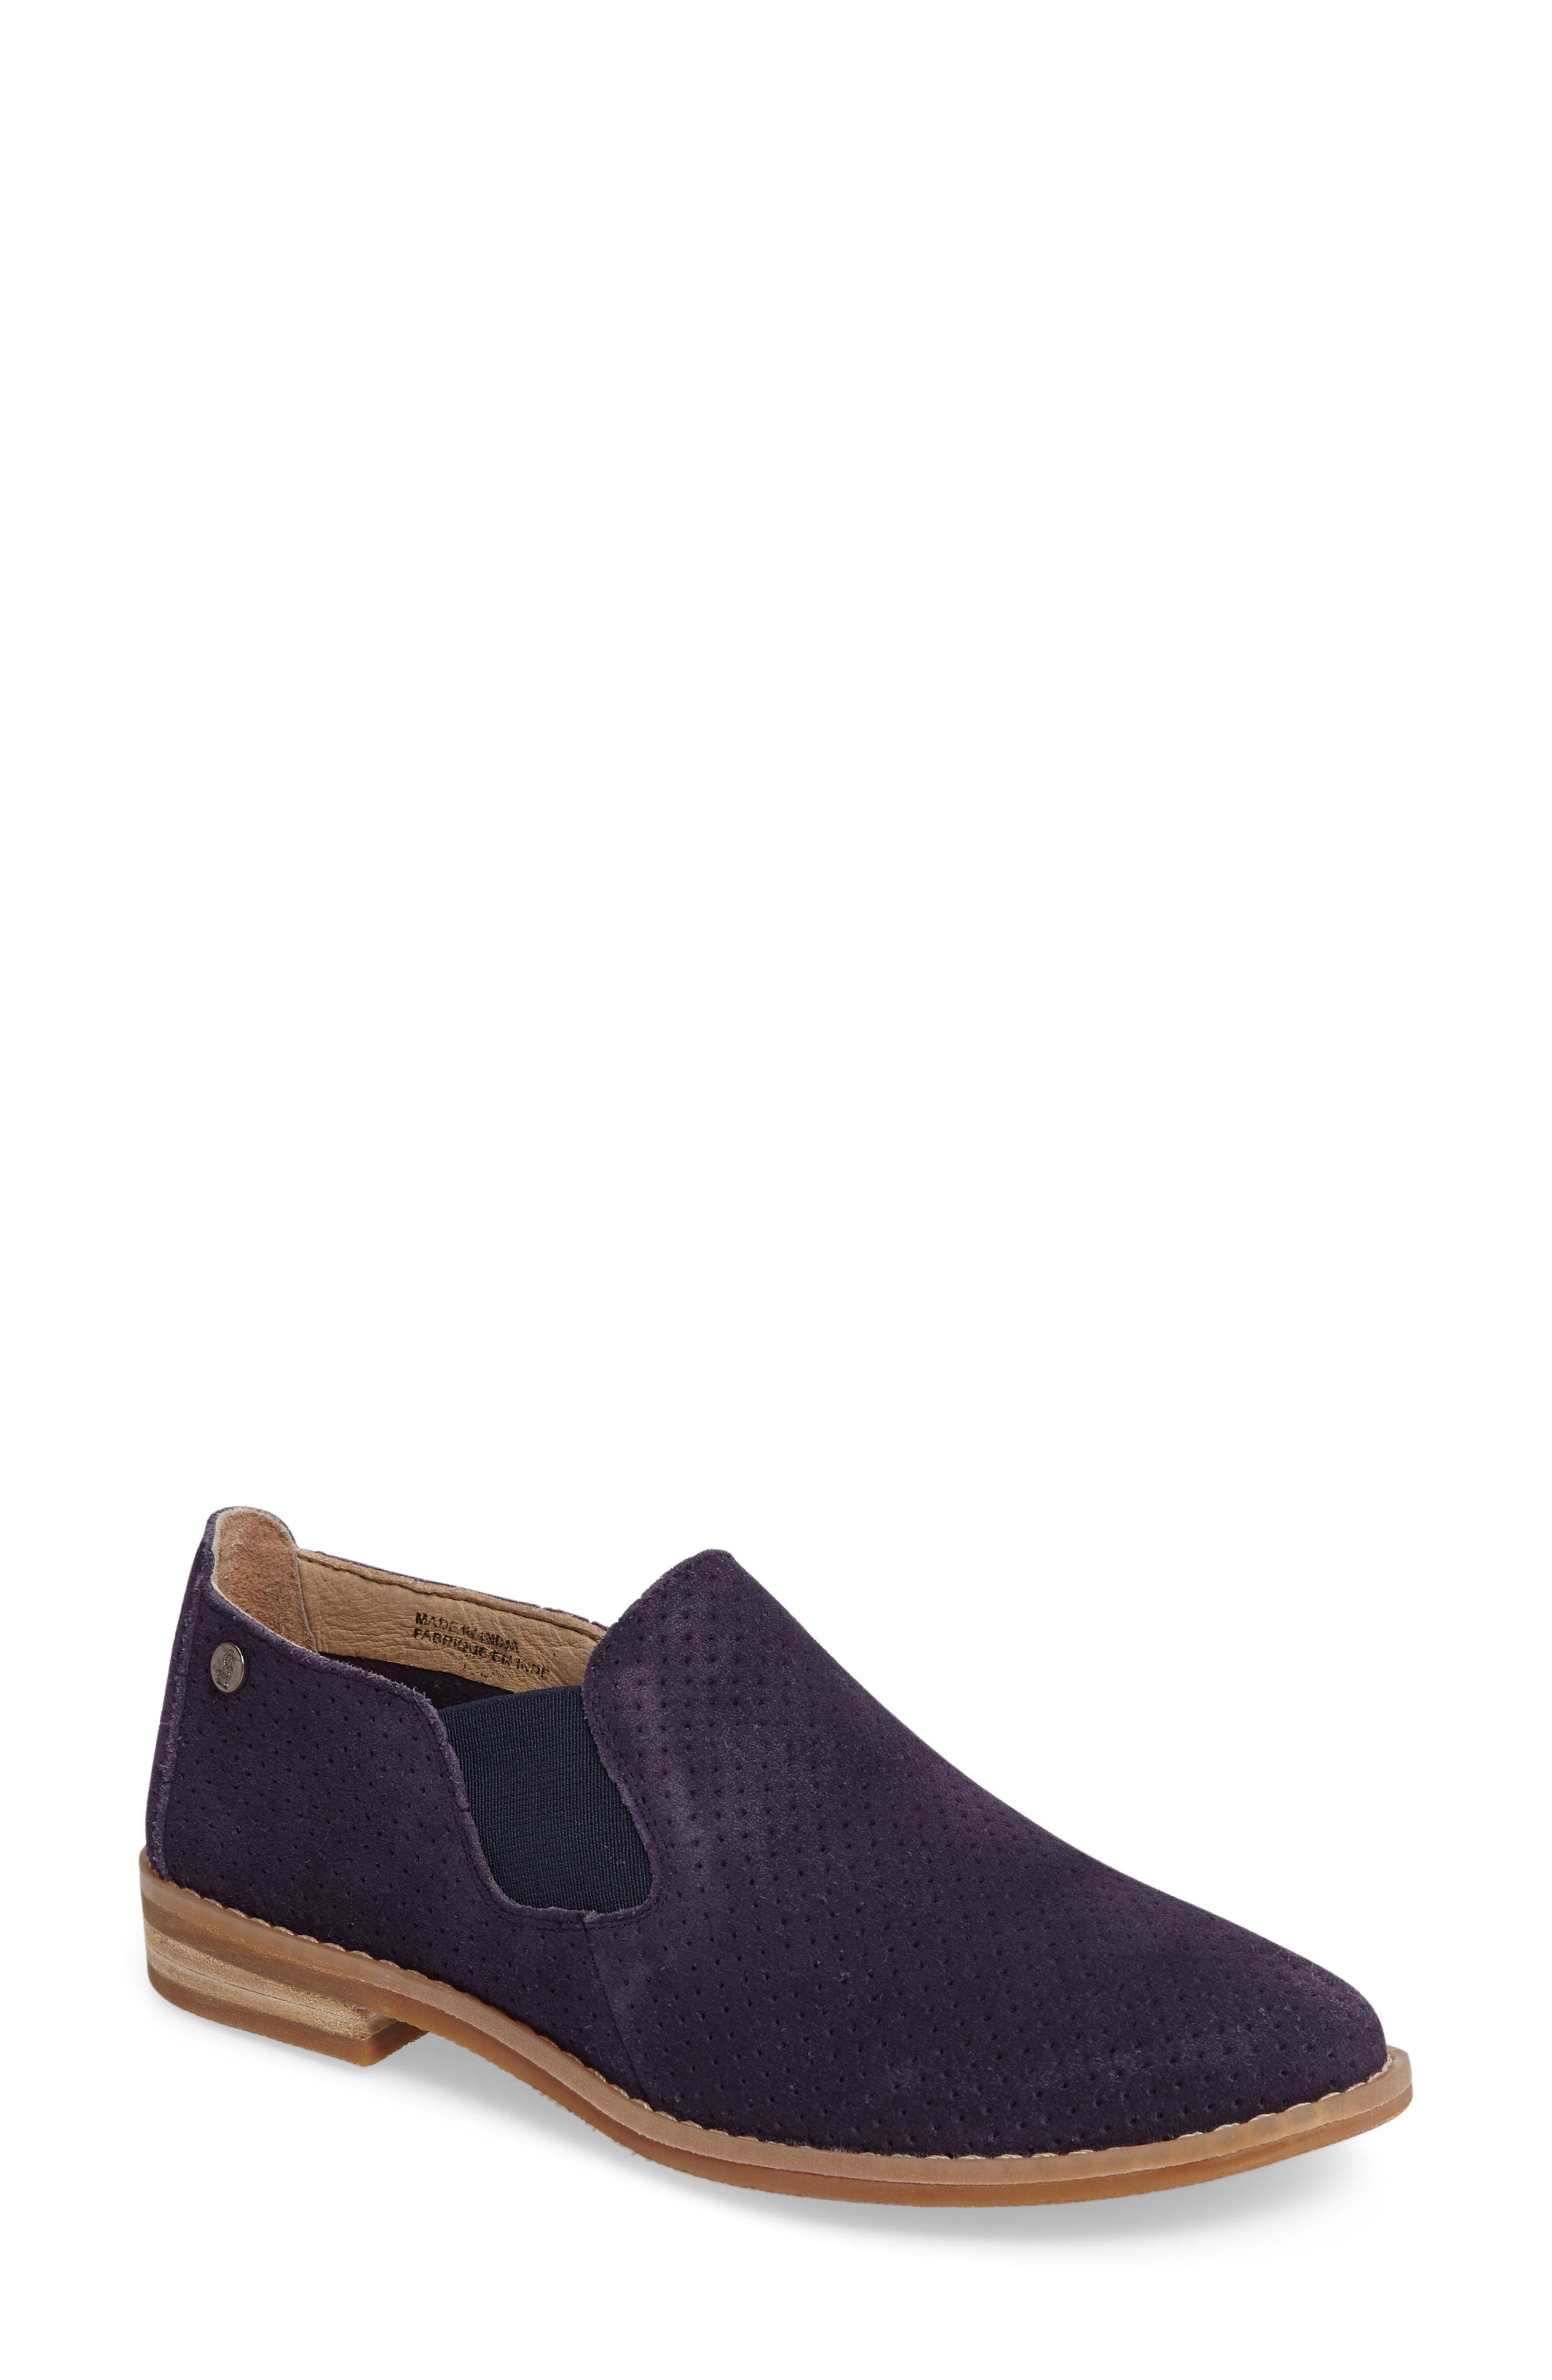 Hush Puppies | Analise Clever Slip-On 